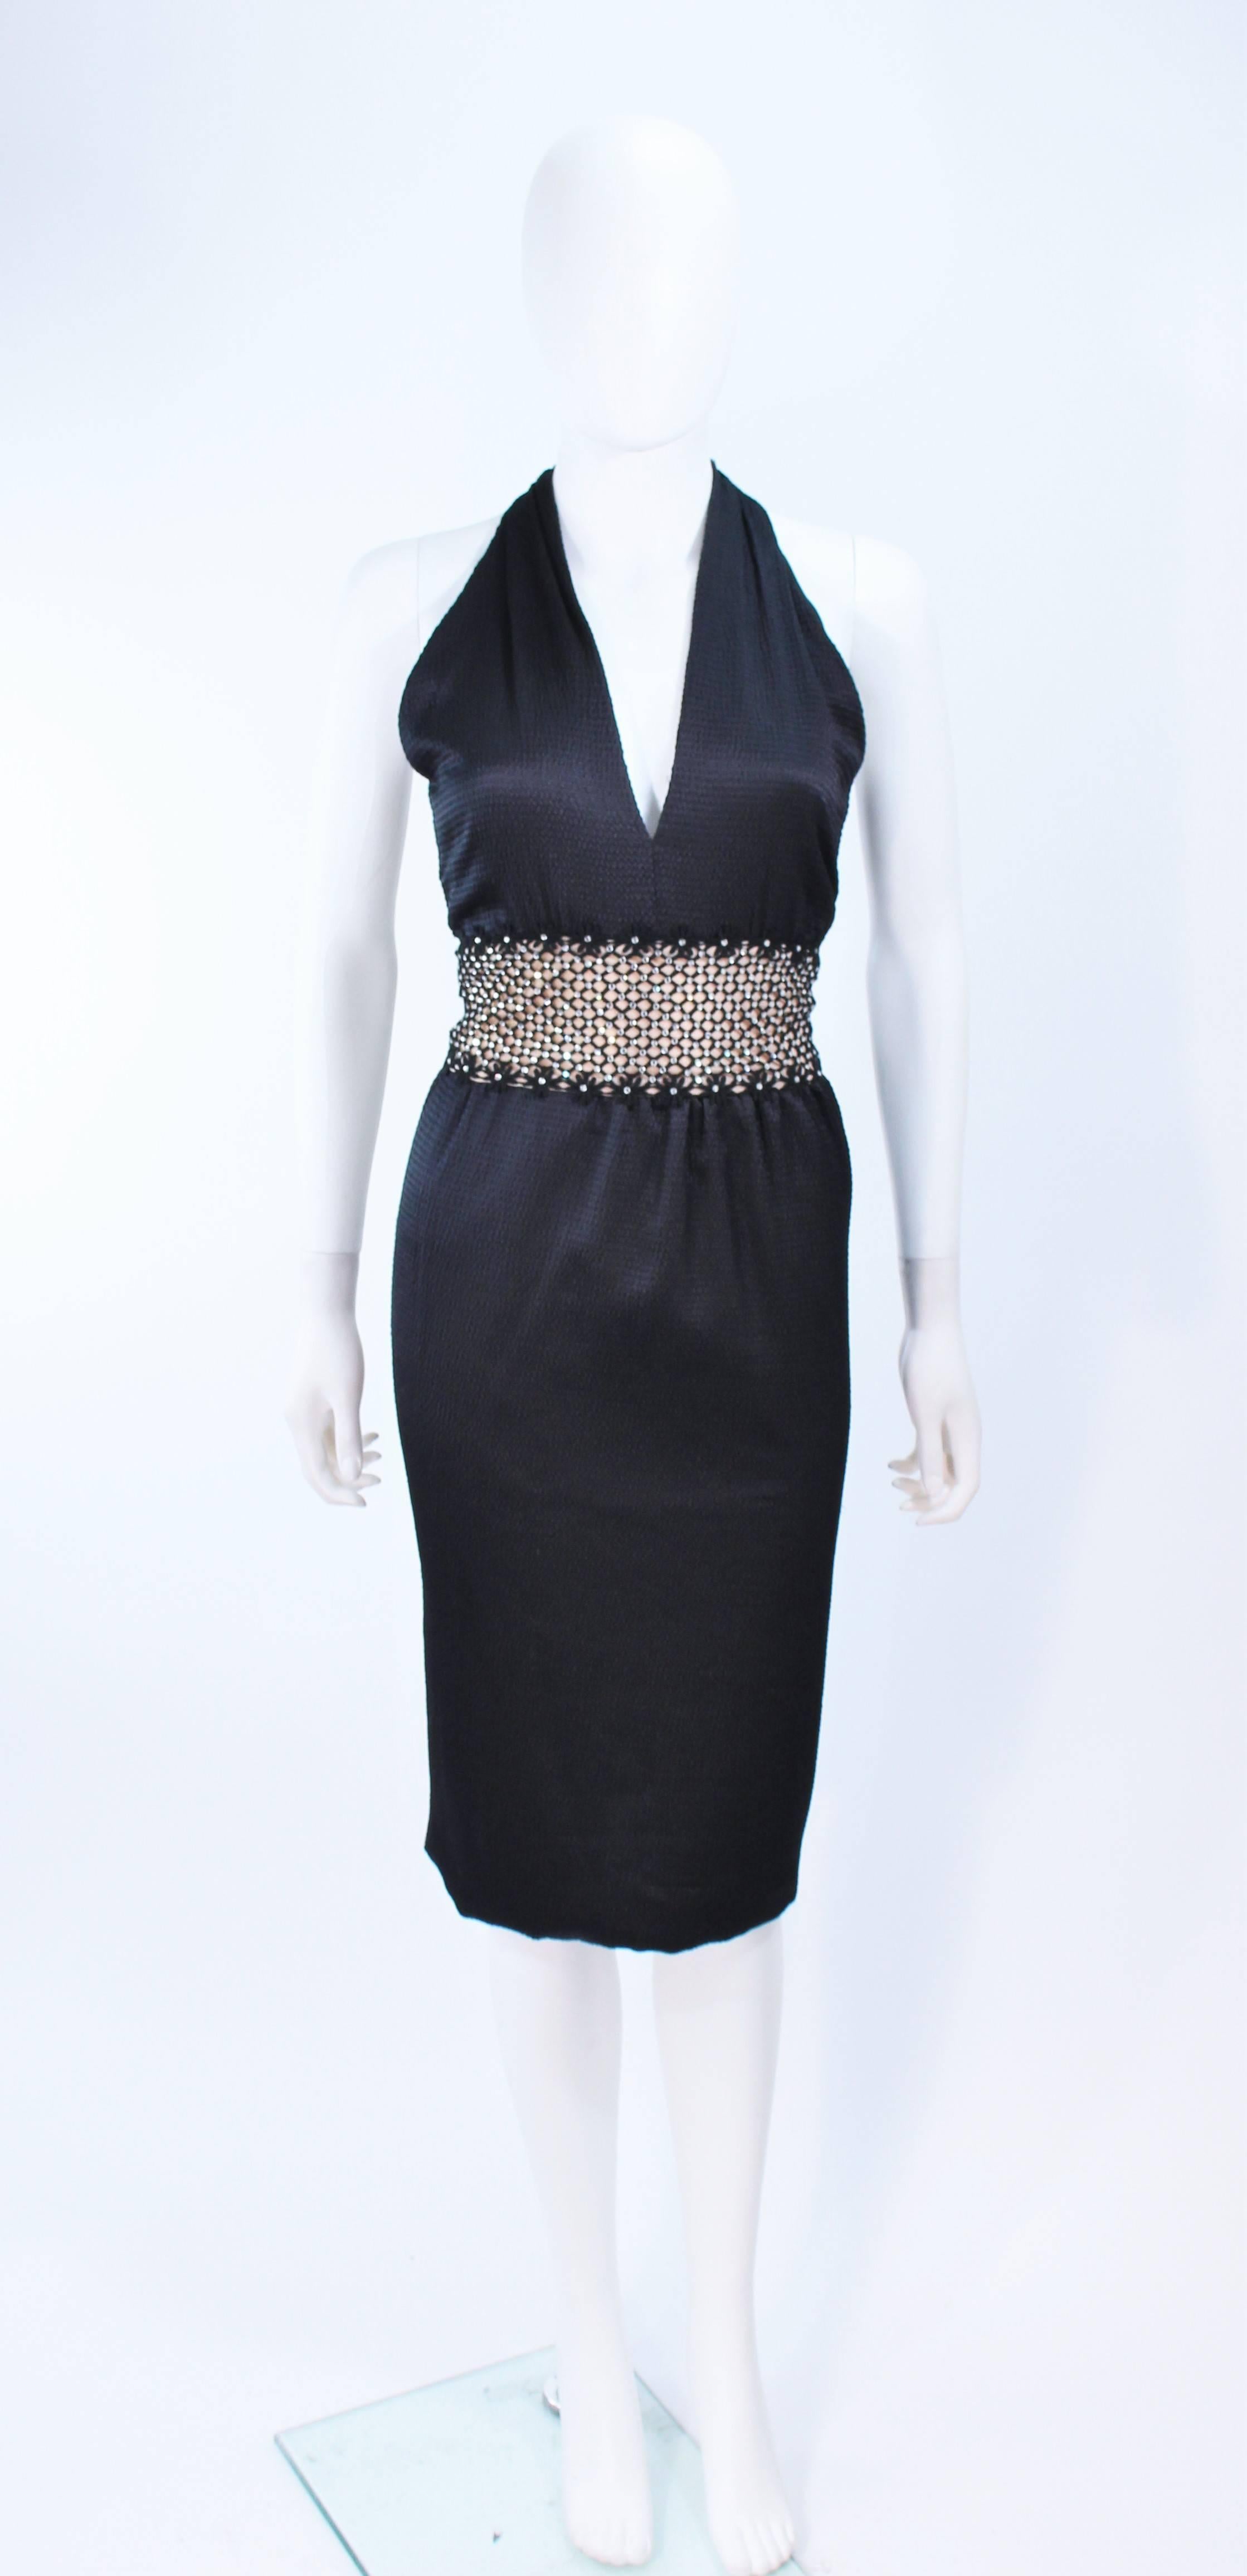 This Robert David-Morton design is composed of a textured silk with a nude embellished lace waist. Features a halter neck with zipper closure. In excellent vintage condition.

**Please cross-reference measurements for personal accuracy. Size in